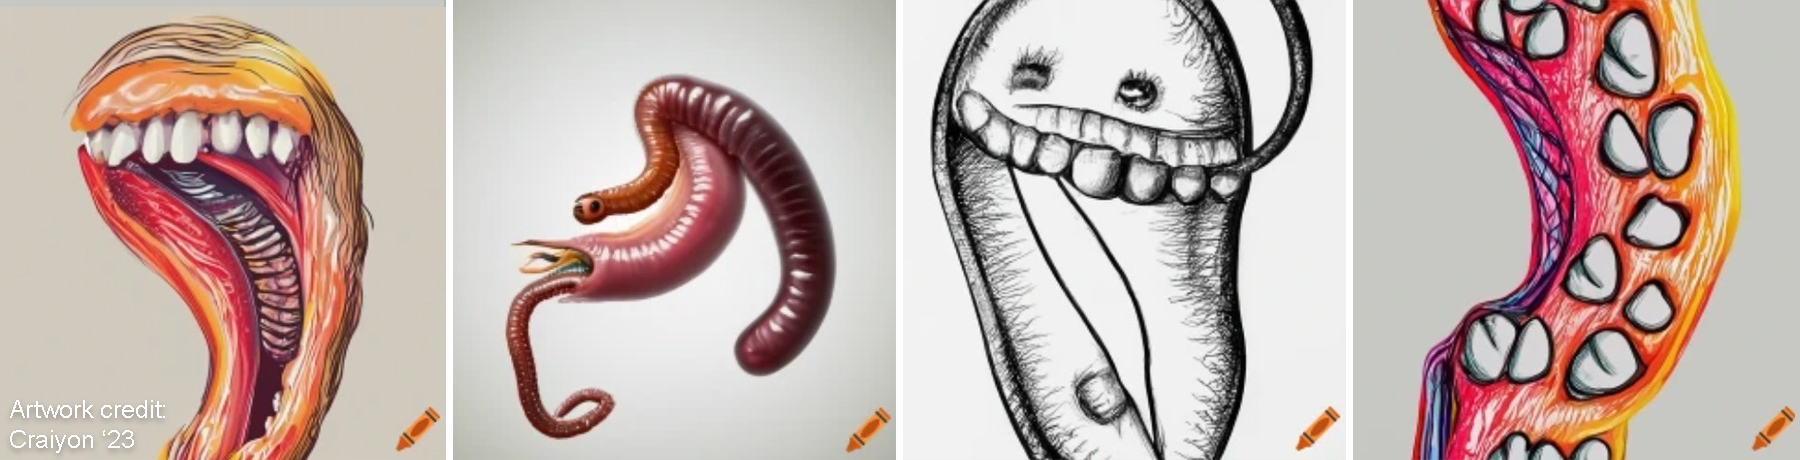 Art depicting nematodes with teeth, generated by artificial intelligence (Craiyon)